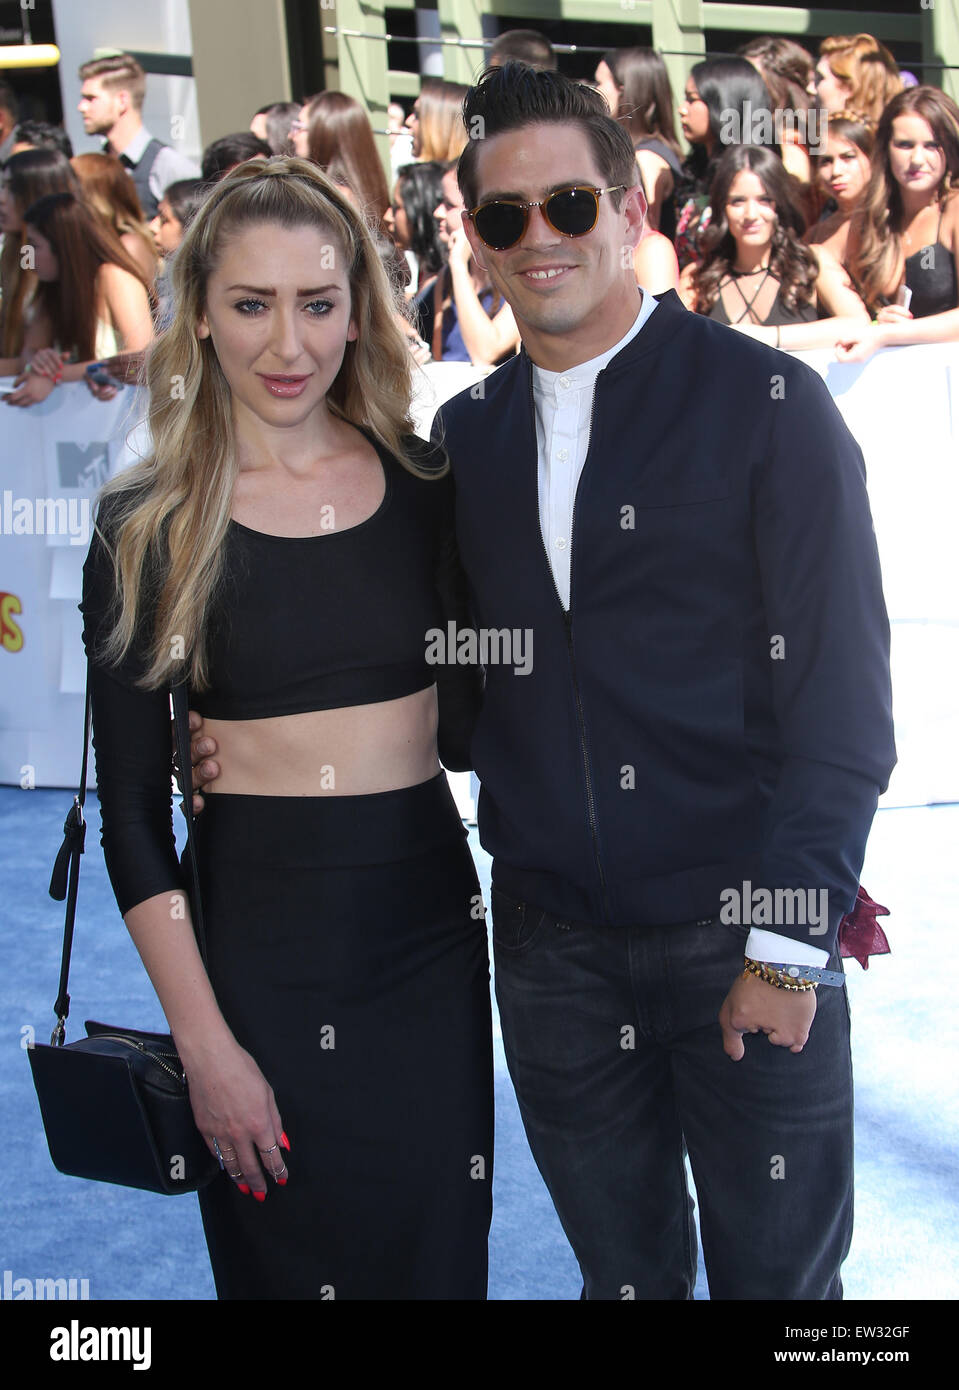 The 2015 MTV Movie Awards - Arrivals Featuring: Jordan Wiseley Where: Los  Angeles, California, United States When: 12 Apr 2015 C Stock Photo - Alamy